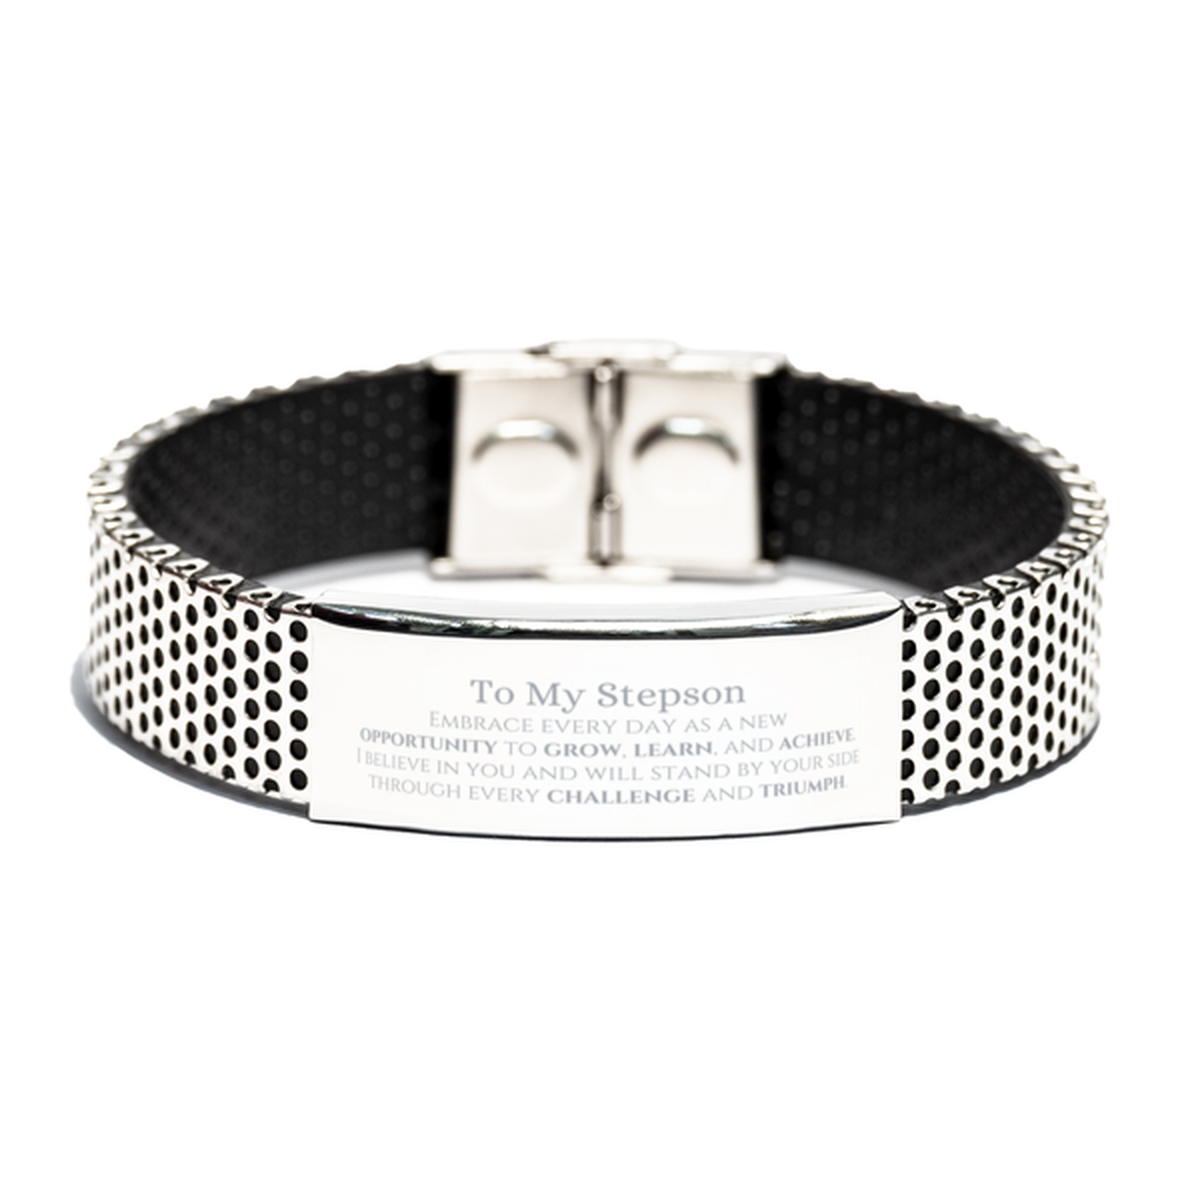 To My Stepson Gifts, I believe in you and will stand by your side, Inspirational Stainless Steel Bracelet For Stepson, Birthday Christmas Motivational Stepson Gifts